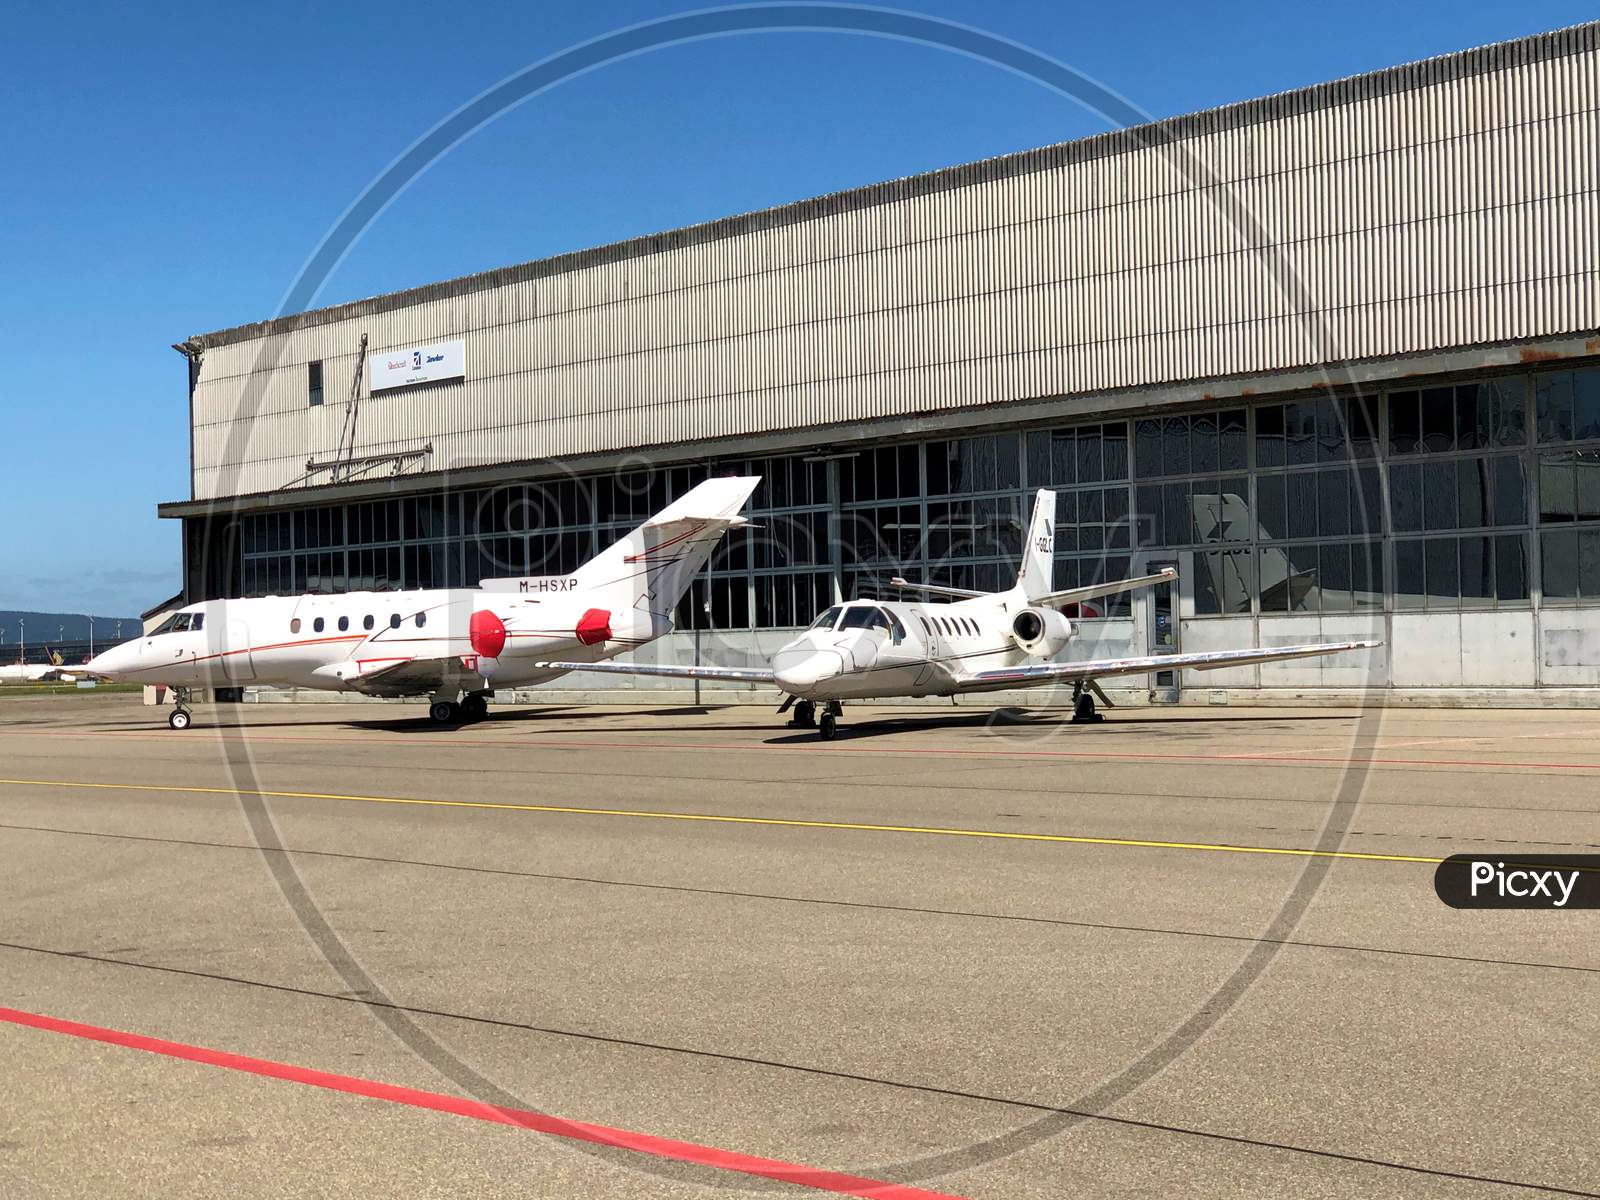 Hawker Beechcraft 800 Xp And A Cessna 550 Citation Ii At The Airport In Zurich In Switzerland 7.7.2020